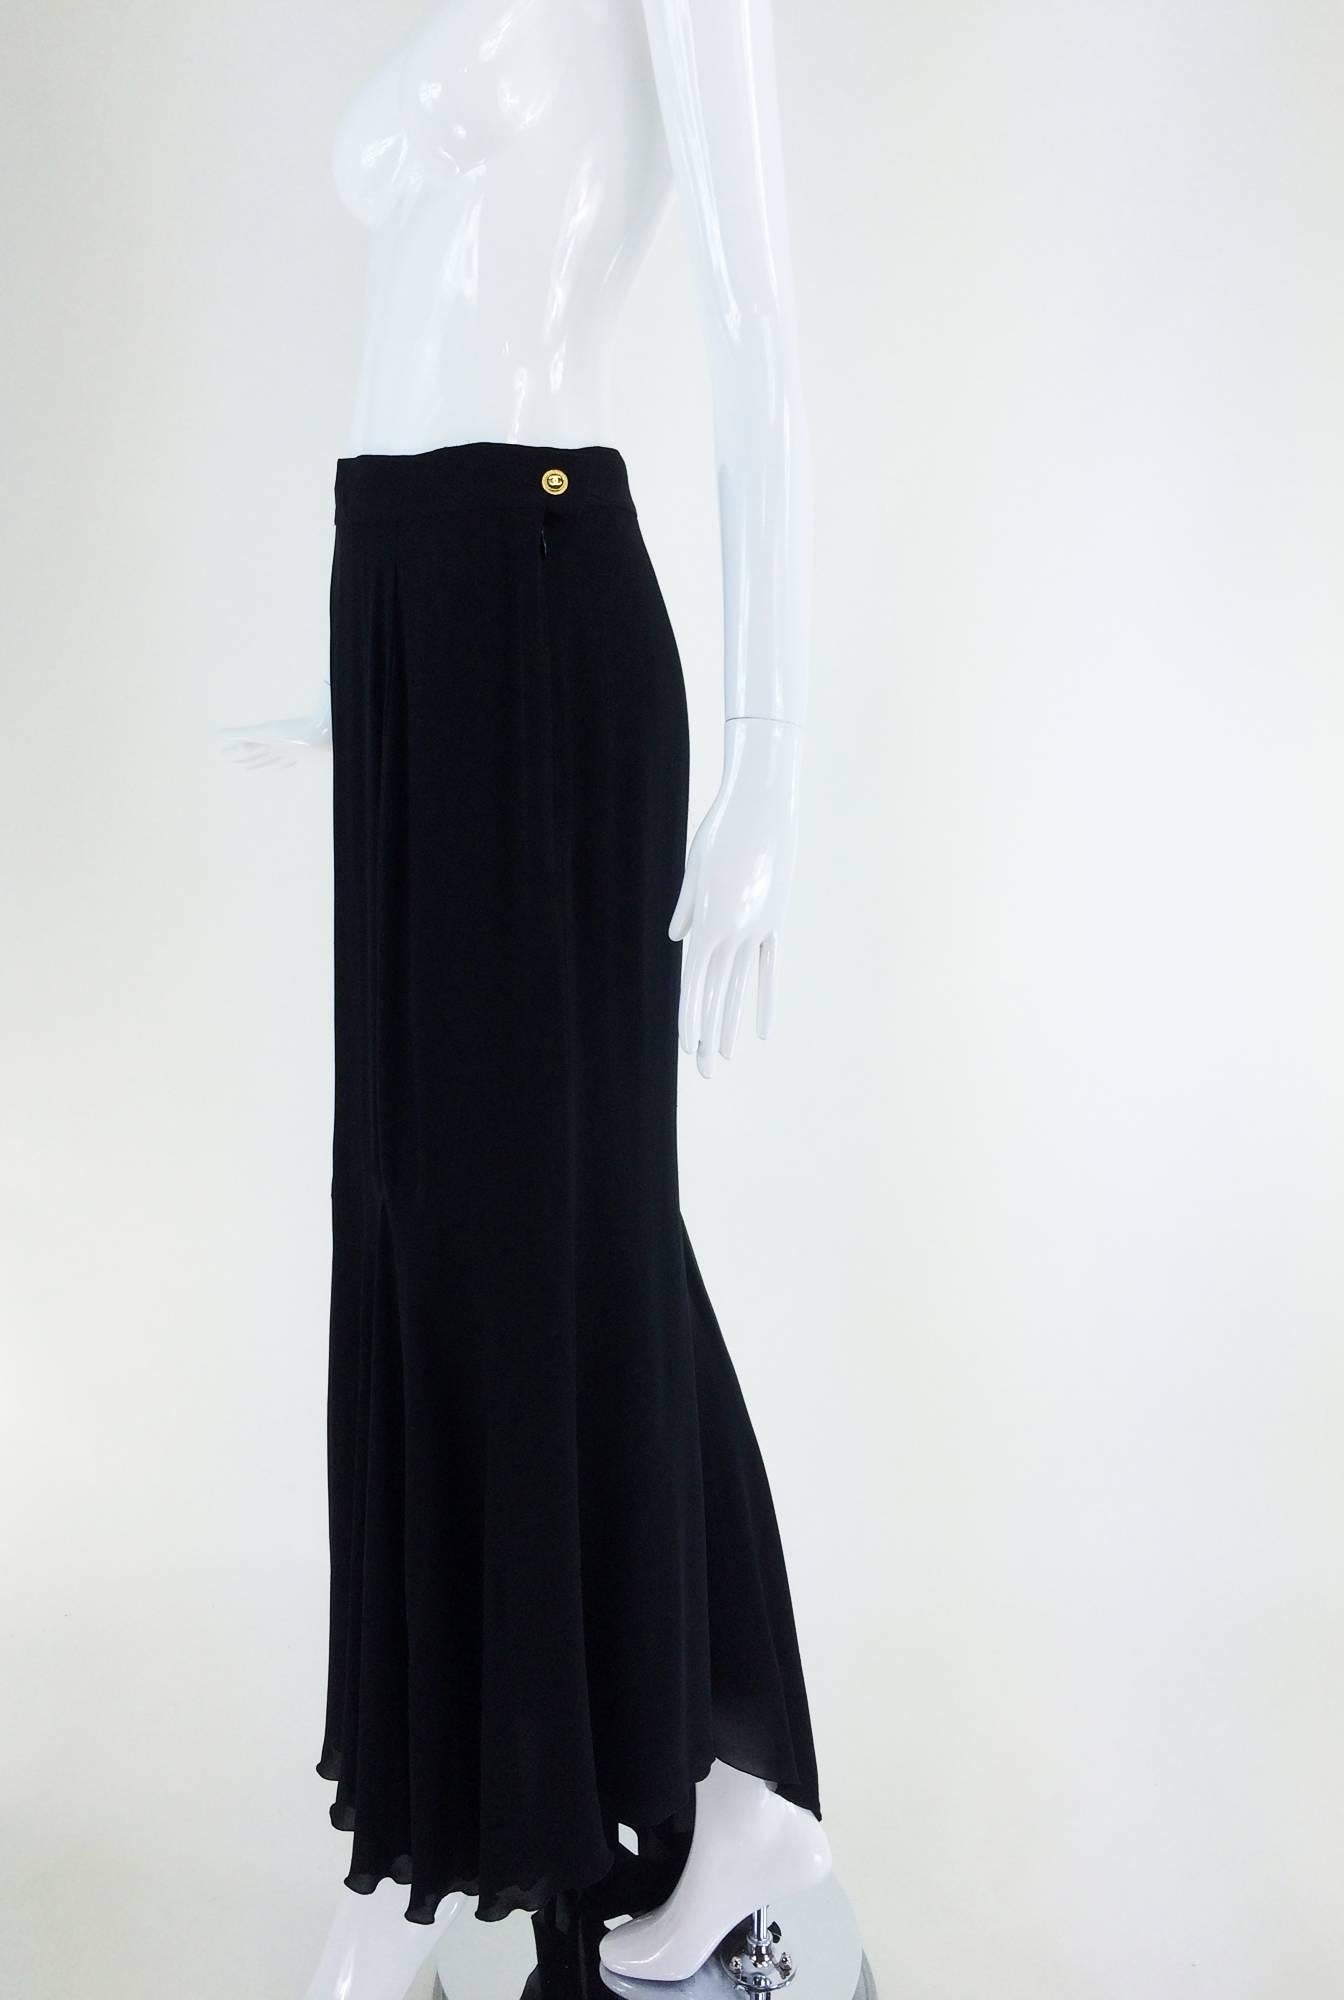 Chanel black silk chiffon evening skirt with train 1990s...Black chiffon evening skirt has a banded waist, closes with a zipper and Chanel button...Lined in black chiffon...There are a few tiny pulls at the waist...Fits like a size 4

In excellent